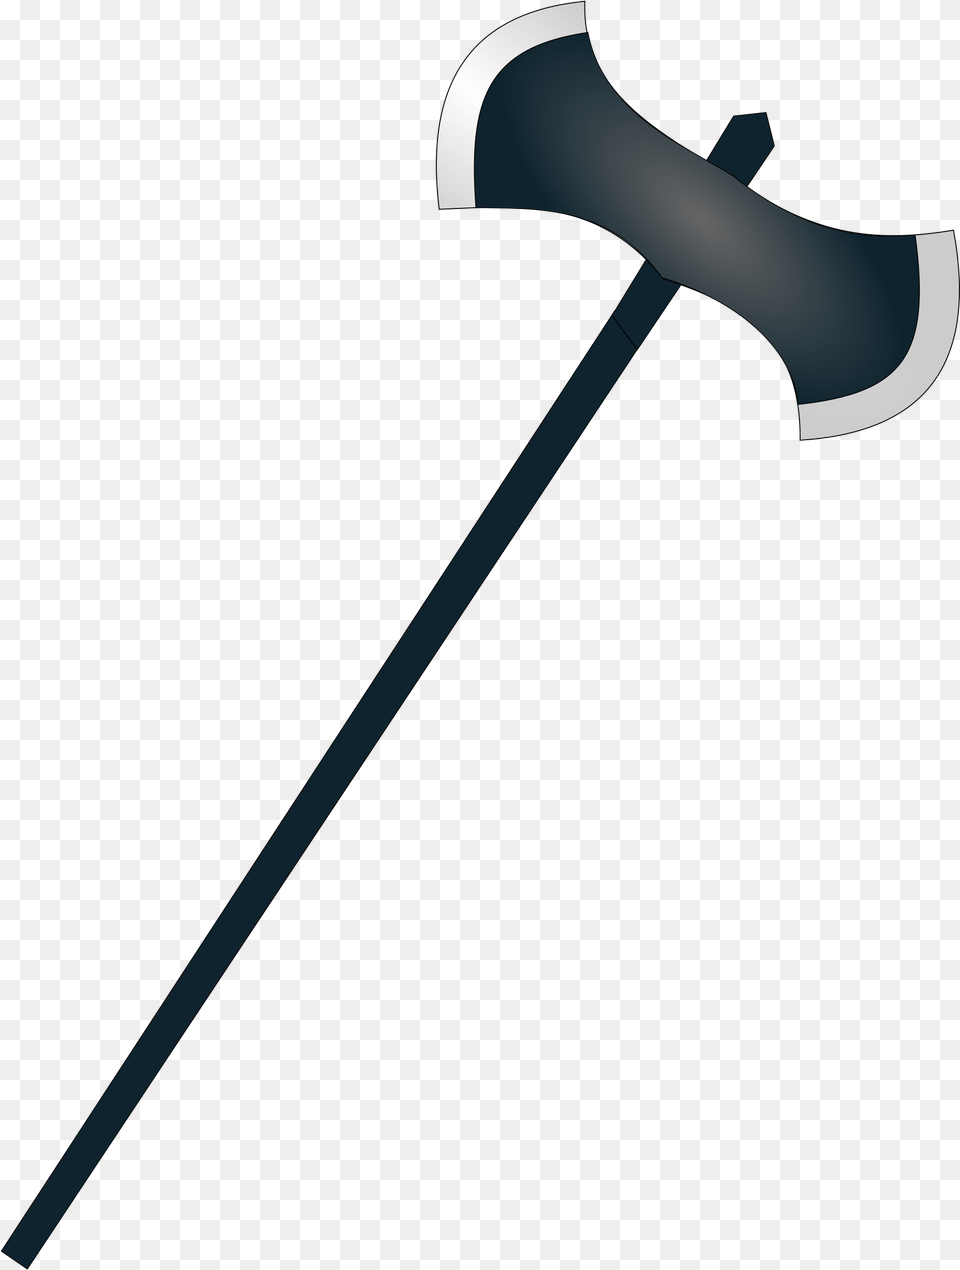 This Free Icons Design Of Axe Icon, Weapon, Device, Person, Tool Png